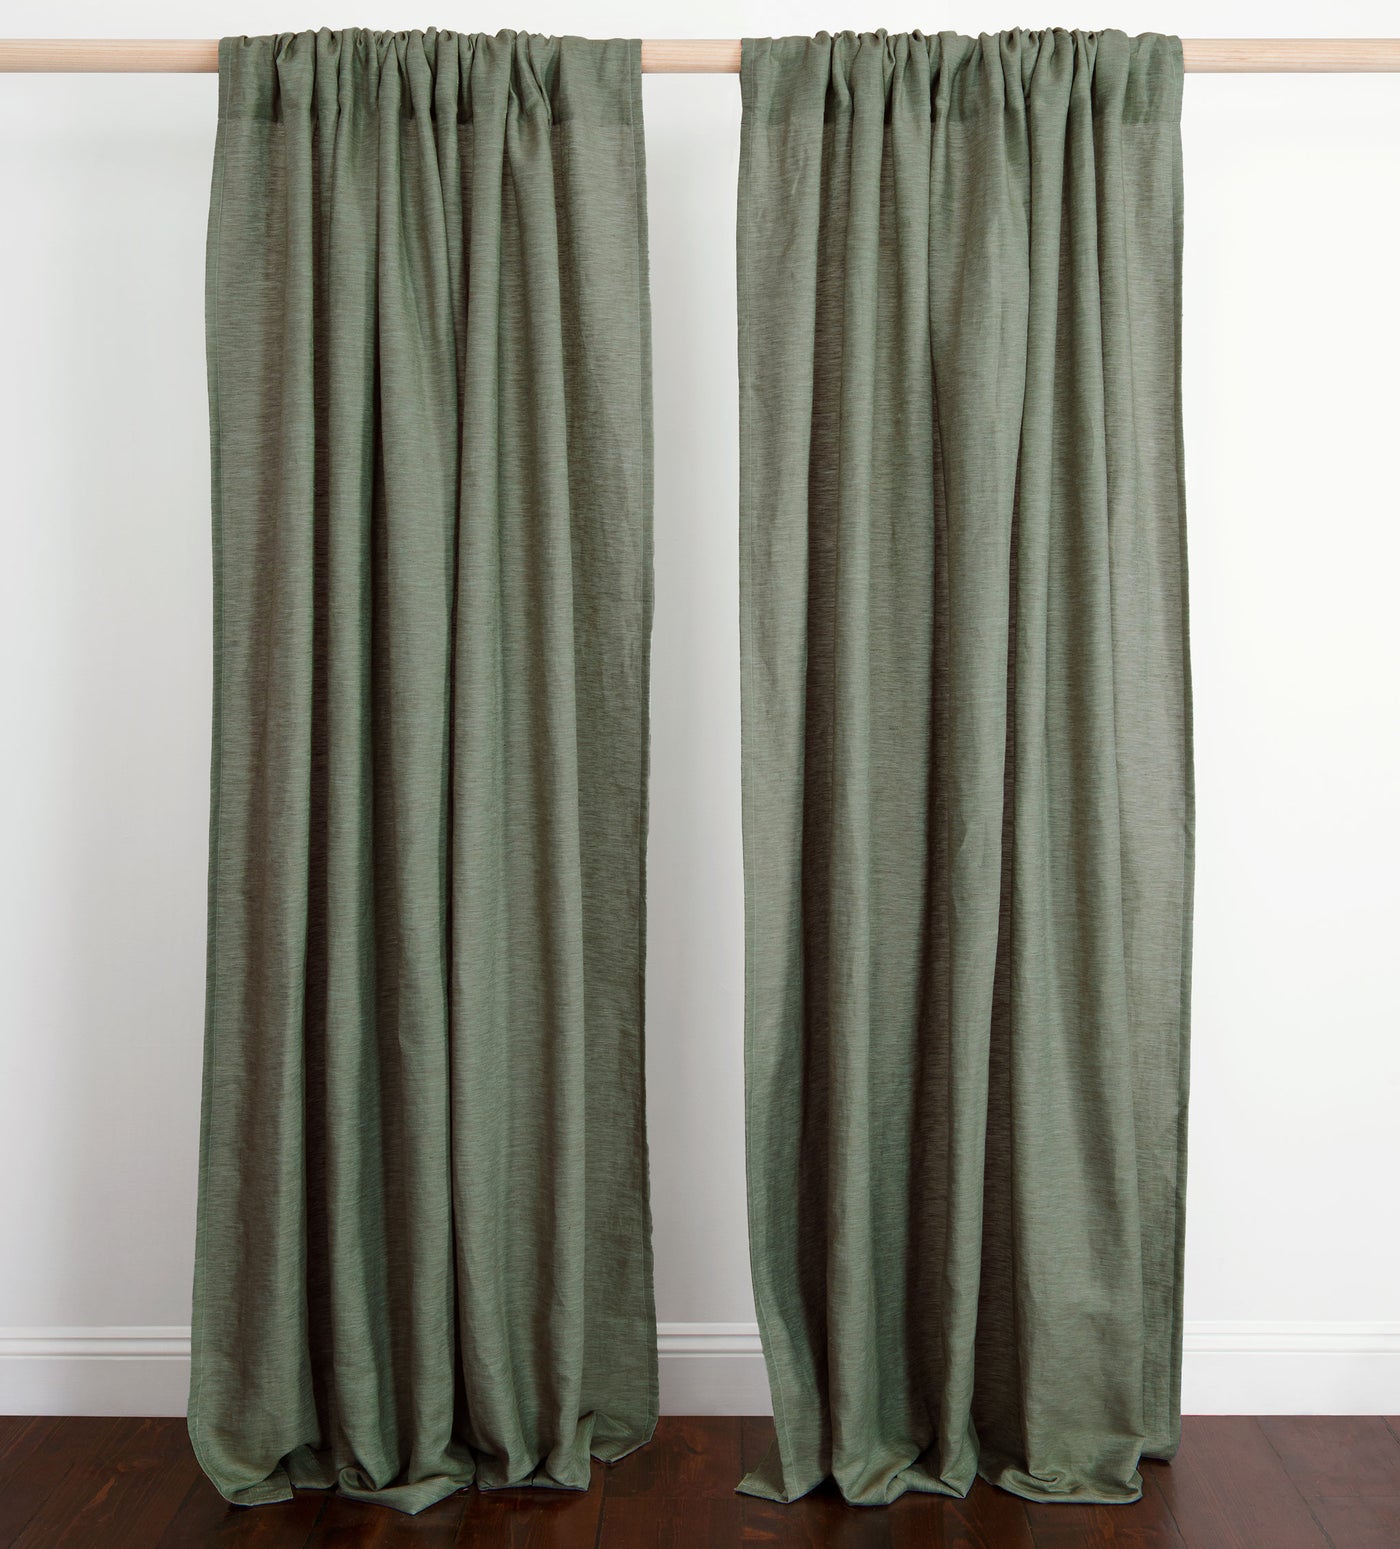 Olive Green Twill Cotton Linen Unlined Loop Top Curtains (Pair)